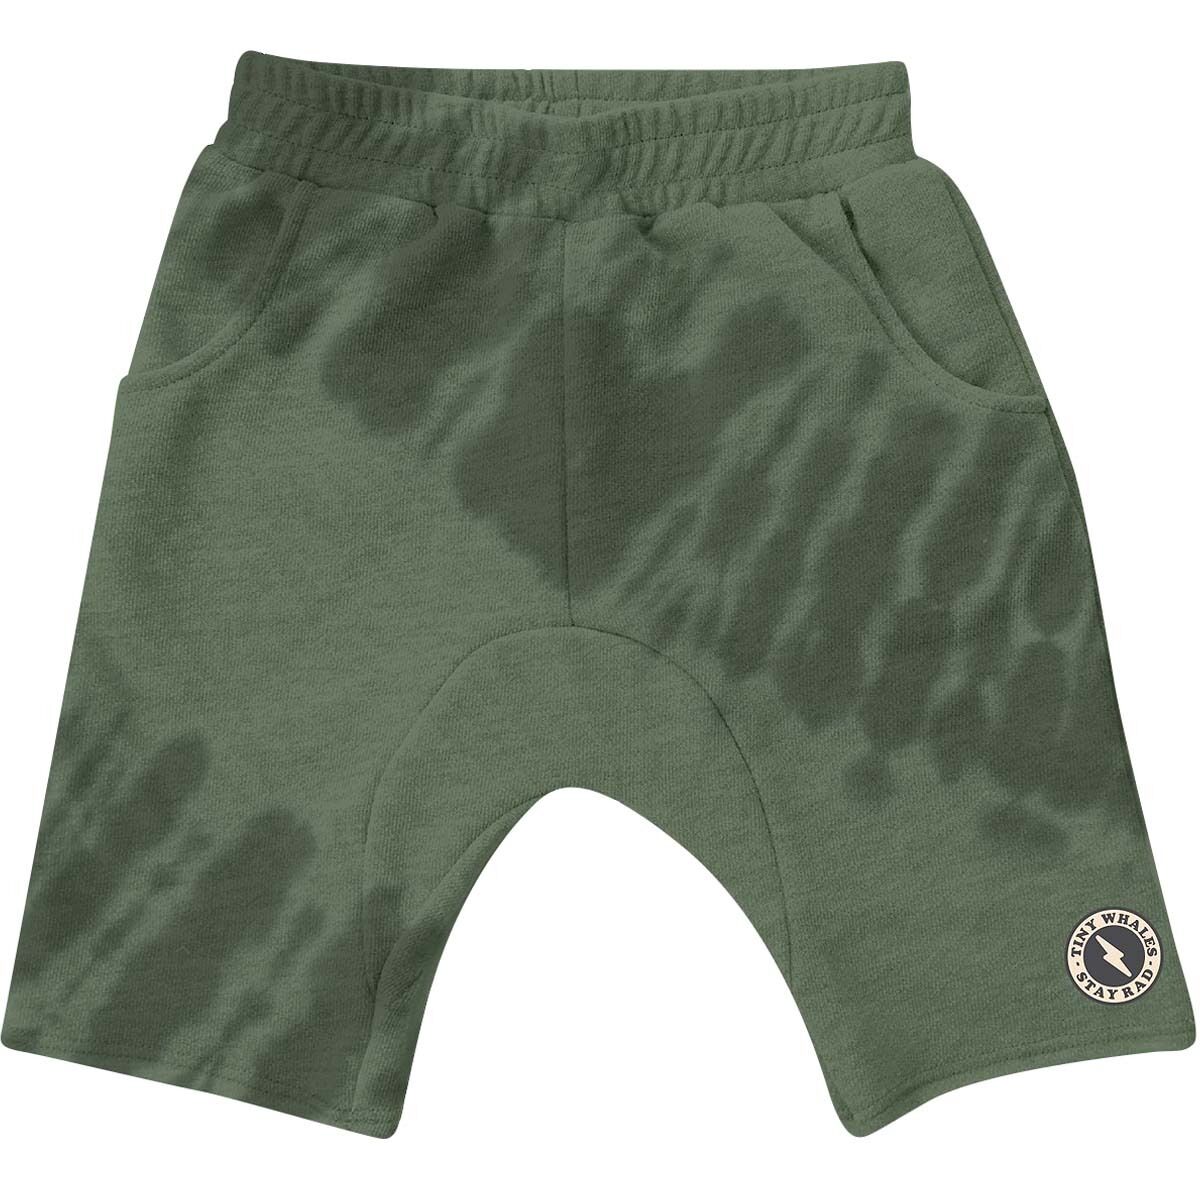 Tiny Whales Welcome To The Jungle Sweatshort - Toddlers'